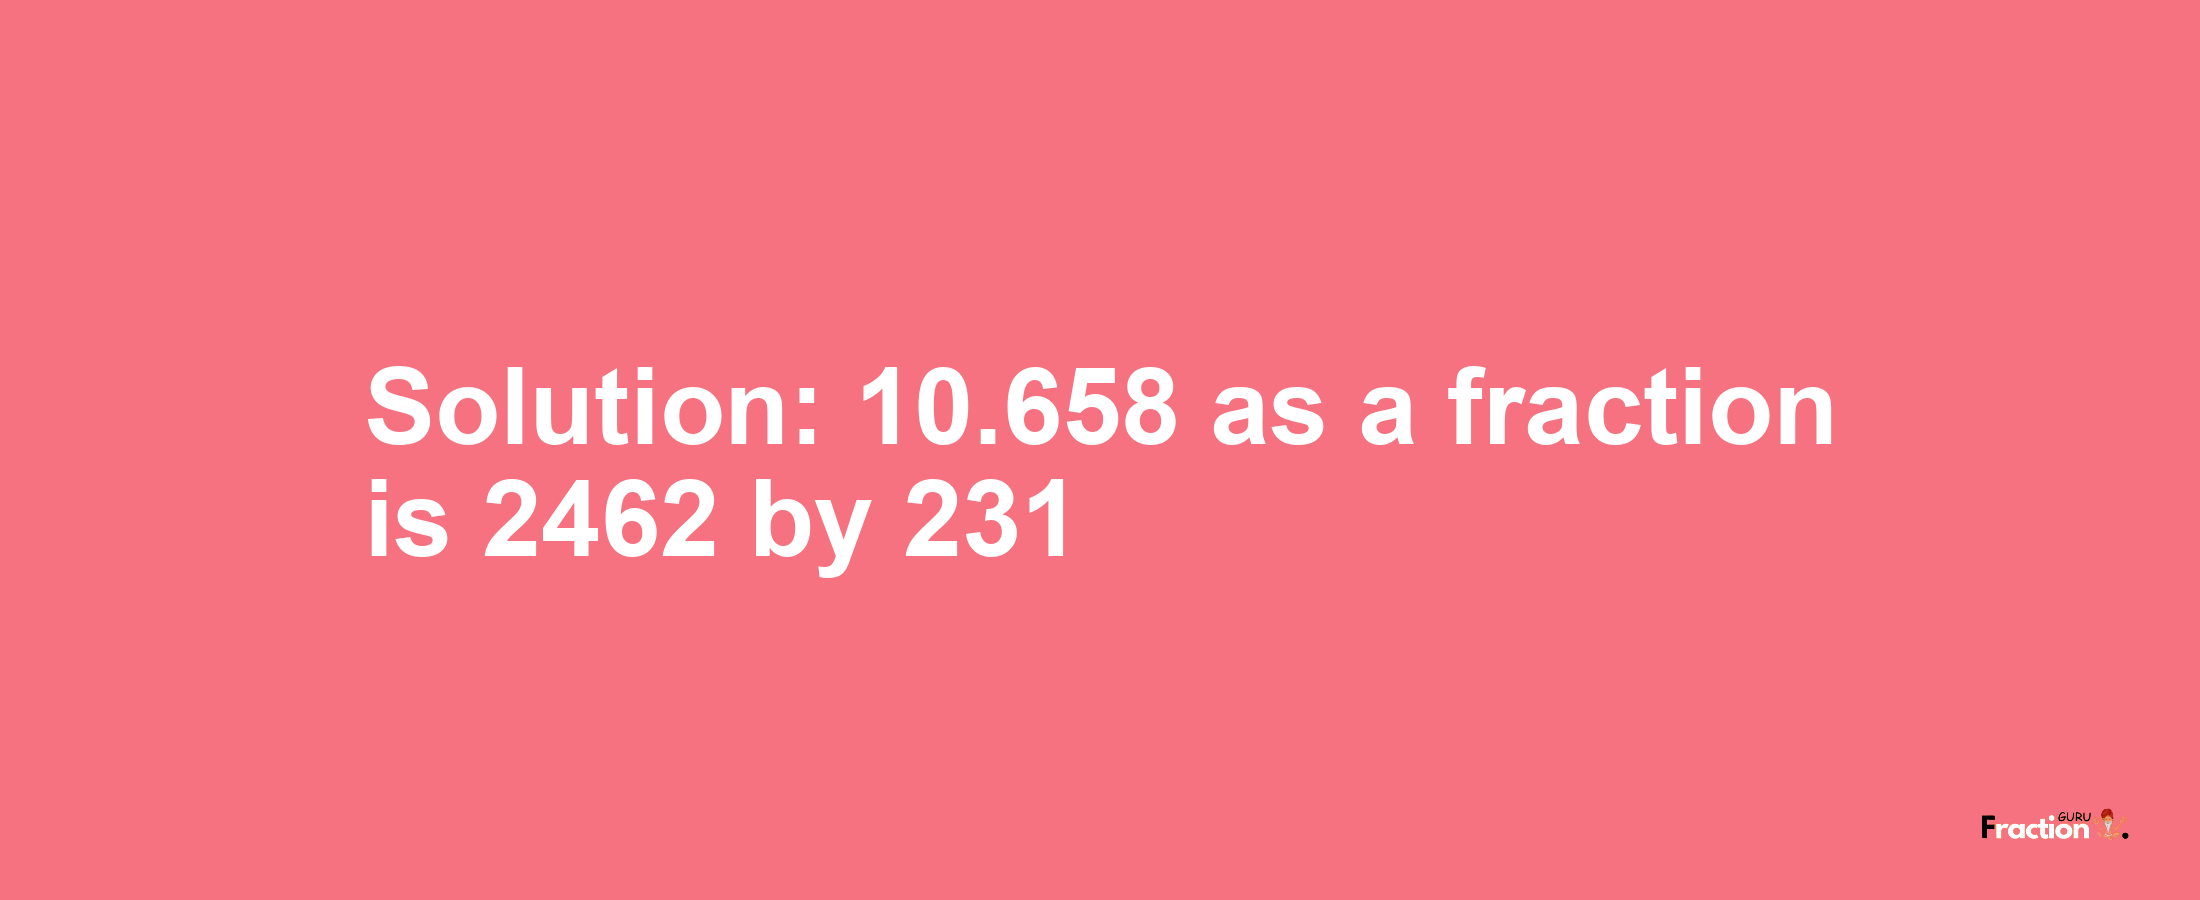 Solution:10.658 as a fraction is 2462/231